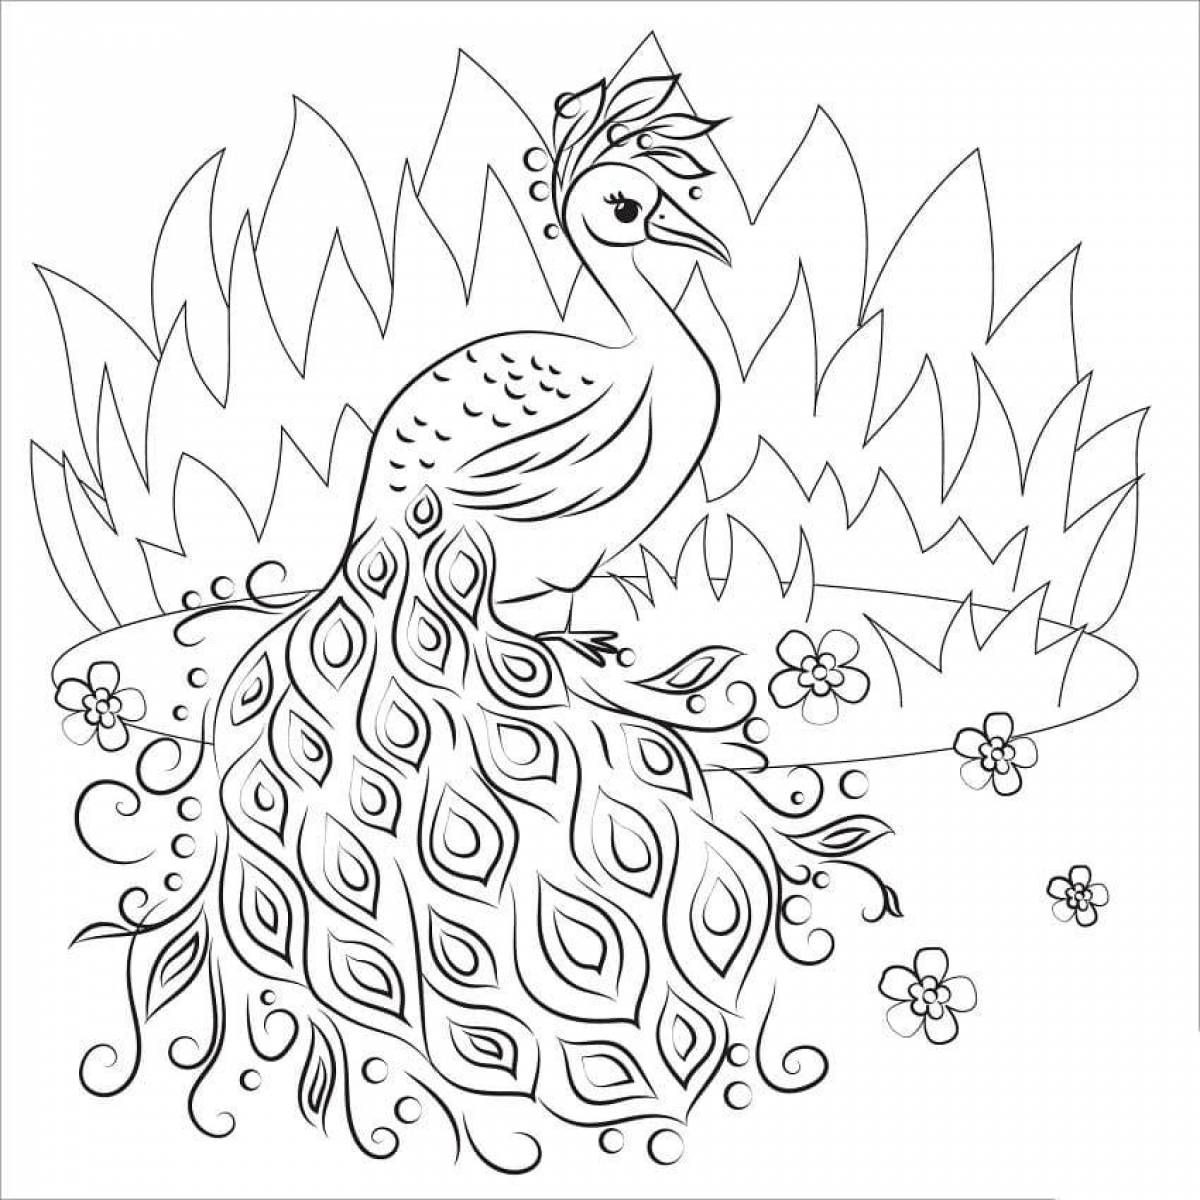 Violent peacock coloring book for kids